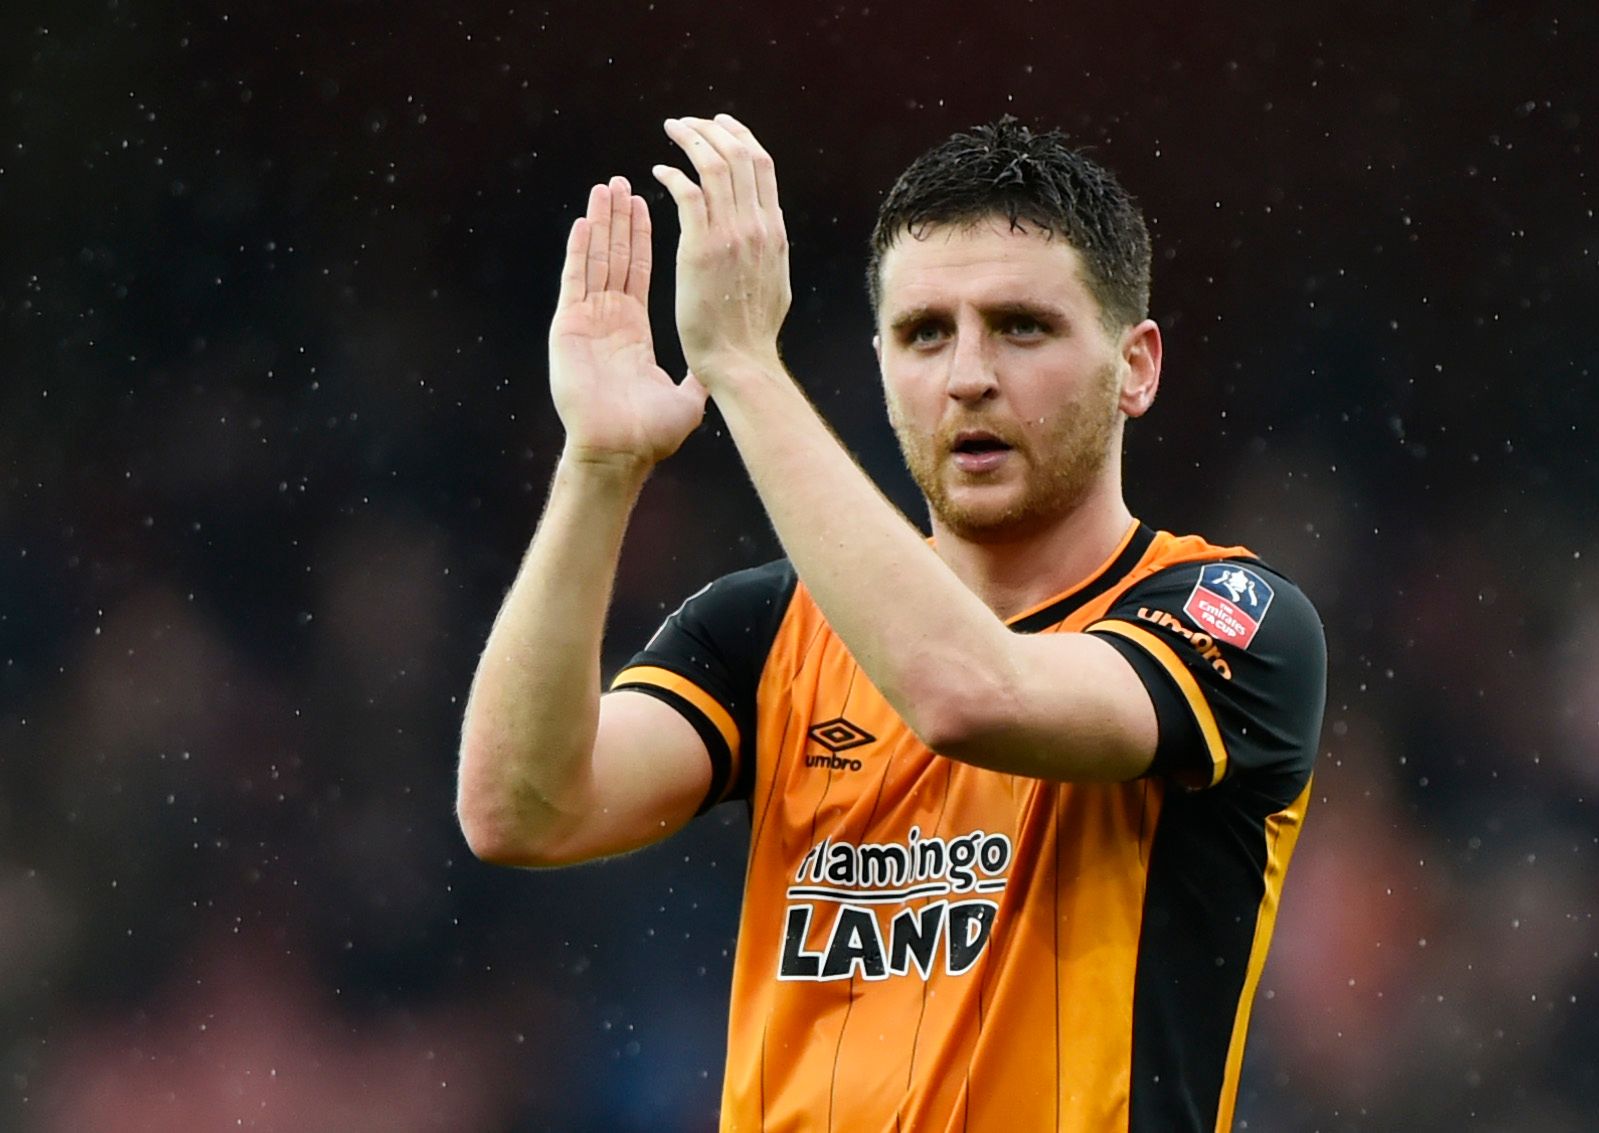 Football Soccer - Arsenal v Hull City - FA Cup Fifth Round - Emirates Stadium - 20/2/16
Hull City's Alex Bruce applauds fans after the game
Reuters / Hannah McKay
Livepic
EDITORIAL USE ONLY. No use with unauthorized audio, video, data, fixture lists, club/league logos or 